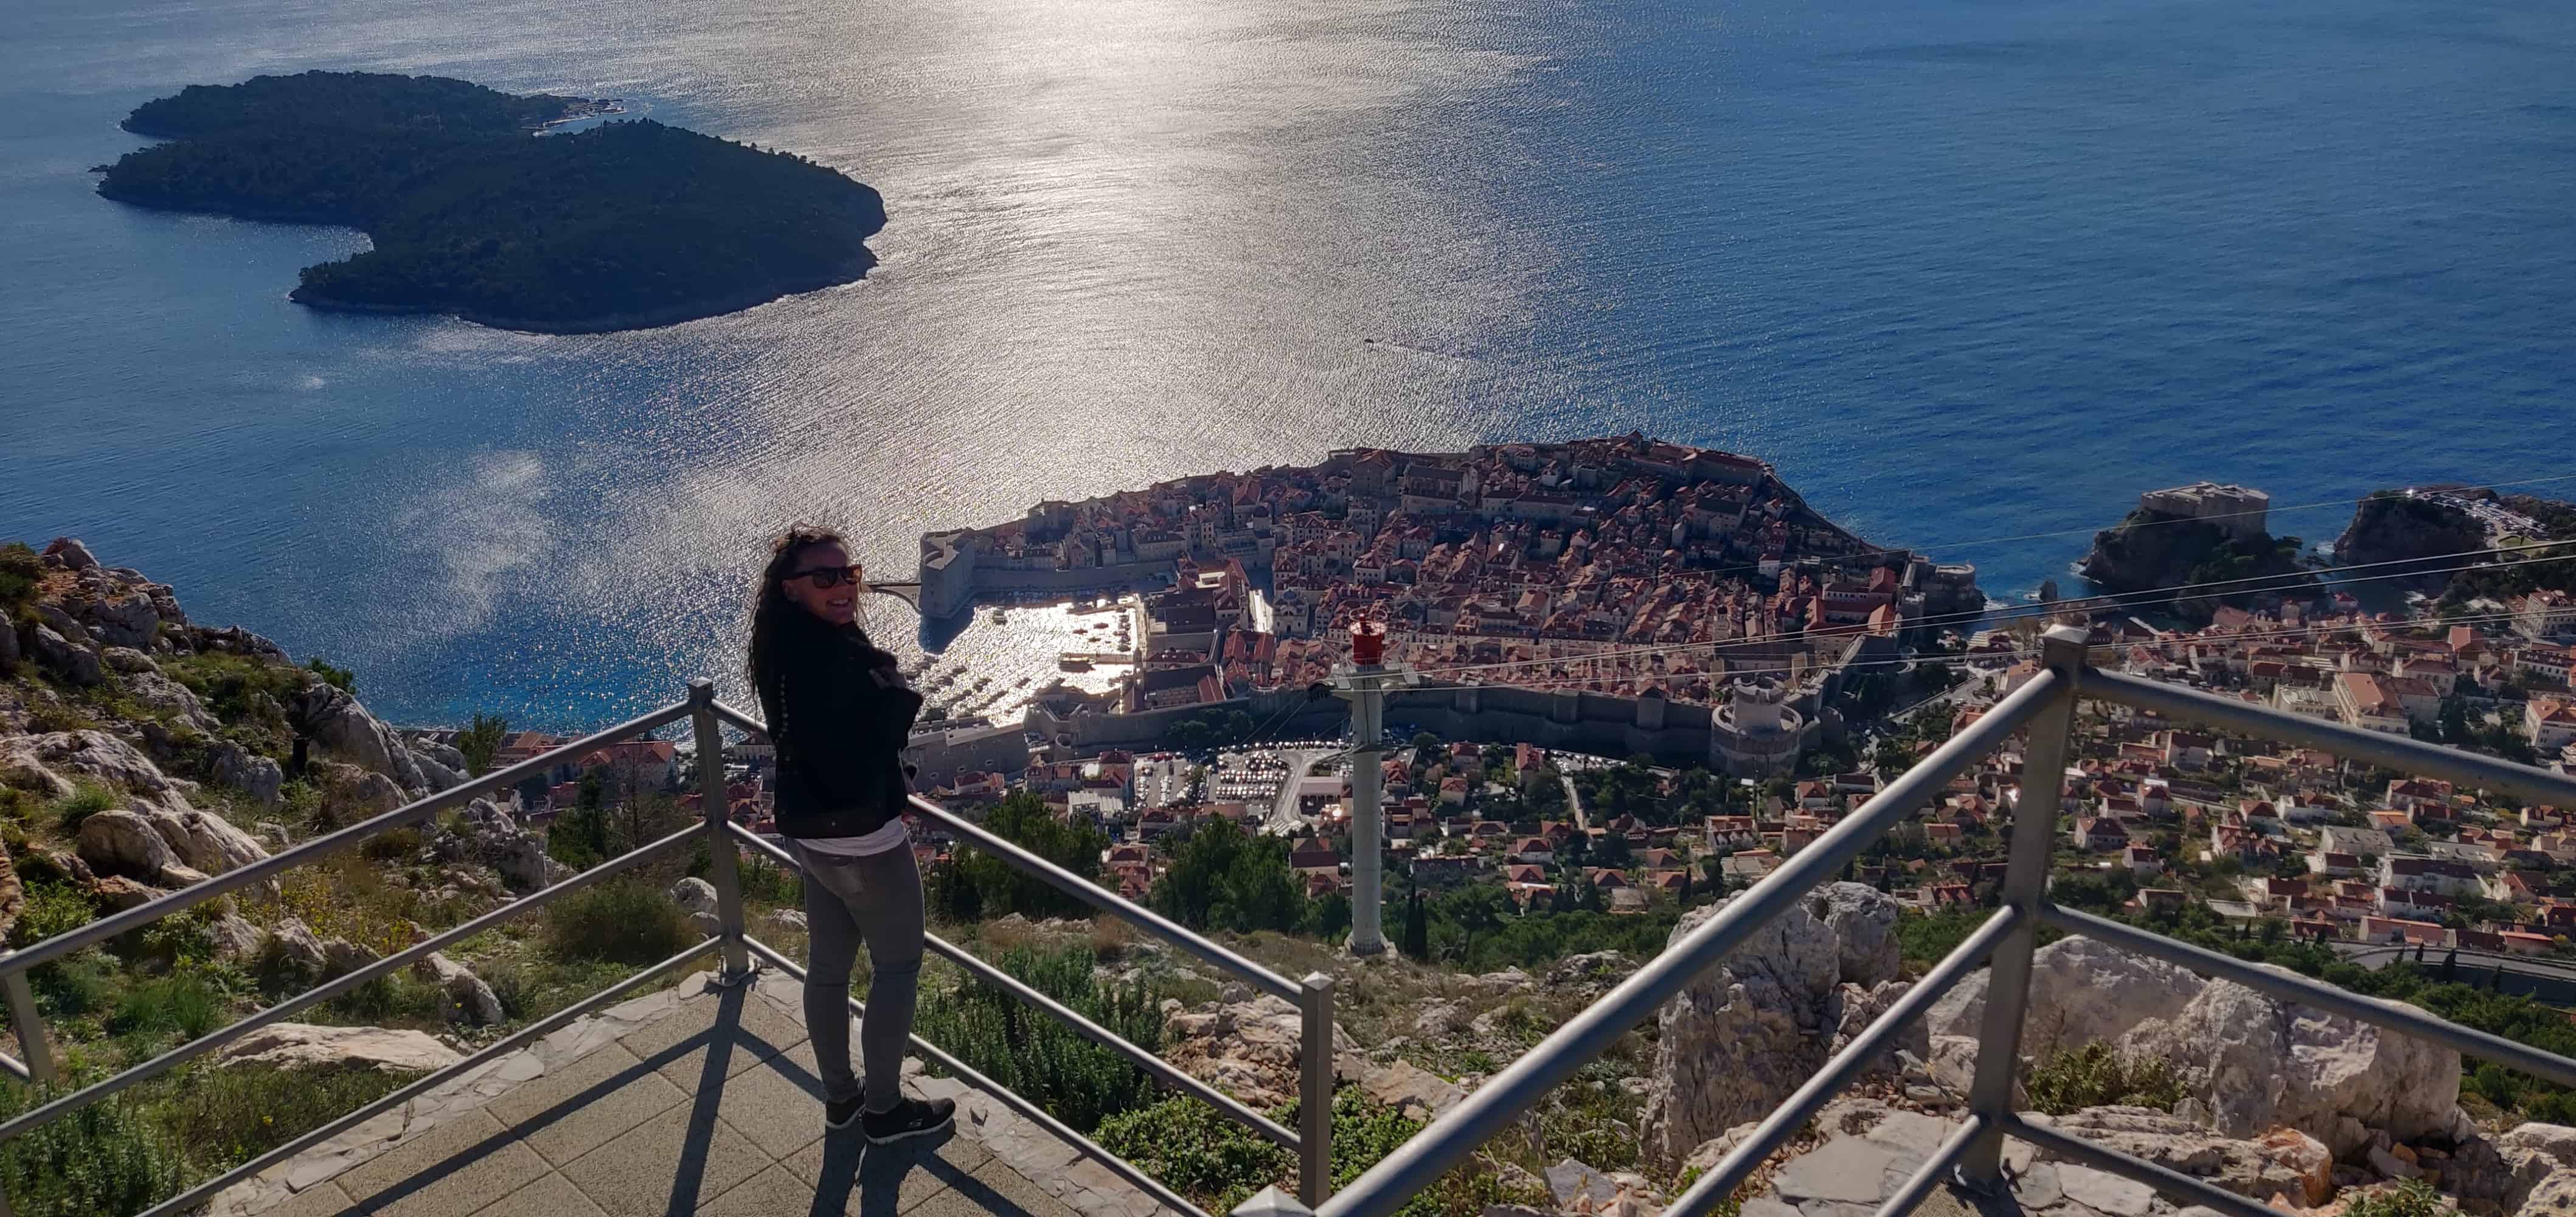 I'm looking out over Dubrovnik and Lokrum island